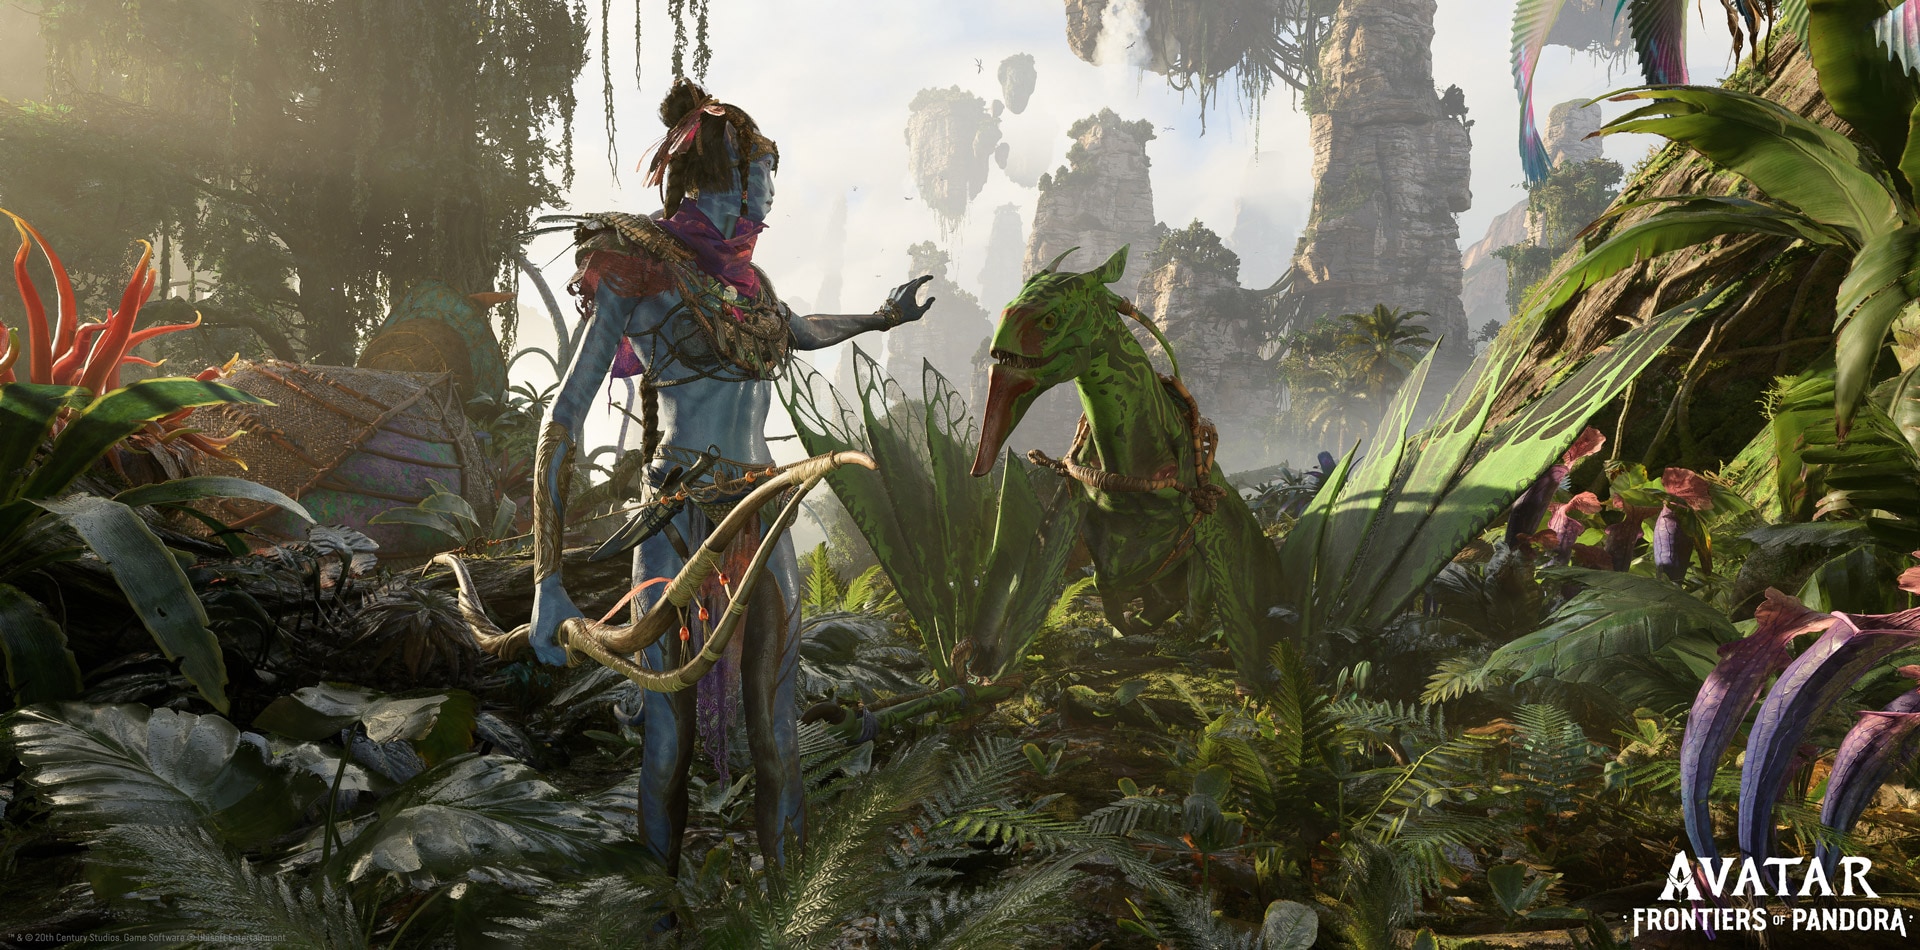 [UN][News] ‘It Was Not the Tech, but the People’ – How Avatar: Frontiers of Pandora Embraces Creativity While Pushing Boundaries of Technology - BANSHEE